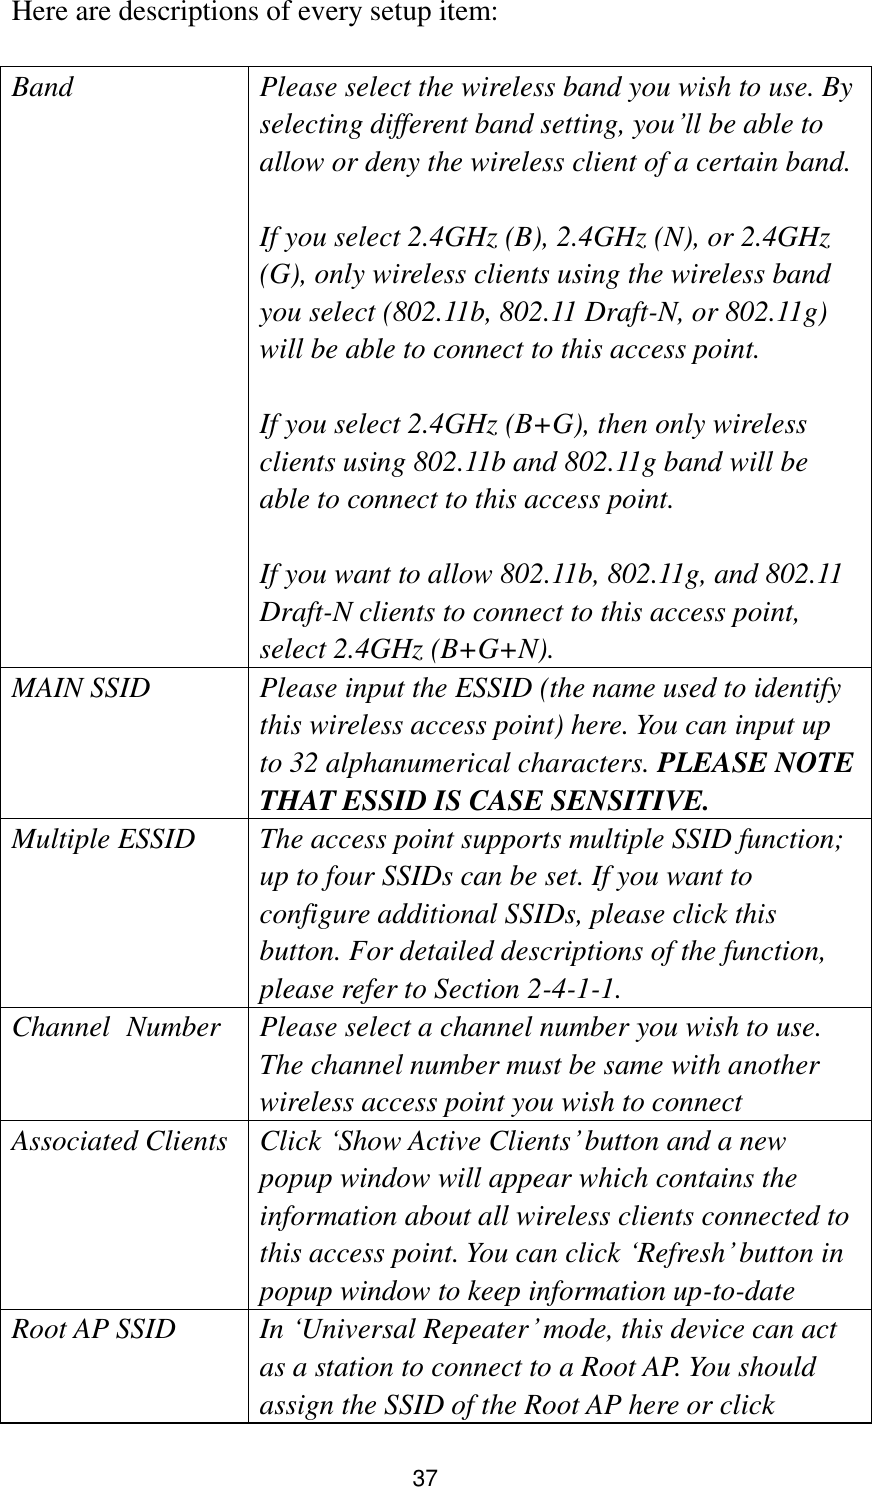 37 Here are descriptions of every setup item:  Band Please select the wireless band you wish to use. By selecting different band setting, you‟ll be able to allow or deny the wireless client of a certain band.    If you select 2.4GHz (B), 2.4GHz (N), or 2.4GHz (G), only wireless clients using the wireless band you select (802.11b, 802.11 Draft-N, or 802.11g) will be able to connect to this access point.  If you select 2.4GHz (B+G), then only wireless clients using 802.11b and 802.11g band will be able to connect to this access point.    If you want to allow 802.11b, 802.11g, and 802.11 Draft-N clients to connect to this access point, select 2.4GHz (B+G+N). MAIN SSID Please input the ESSID (the name used to identify this wireless access point) here. You can input up to 32 alphanumerical characters. PLEASE NOTE     THAT ESSID IS CASE SENSITIVE. Multiple ESSID The access point supports multiple SSID function; up to four SSIDs can be set. If you want to configure additional SSIDs, please click this button. For detailed descriptions of the function, please refer to Section 2-4-1-1. Channel   Number Please select a channel number you wish to use. The channel number must be same with another wireless access point you wish to connect Associated Clients Click „Show Active Clients‟ button and a new popup window will appear which contains the information about all wireless clients connected to this access point. You can click „Refresh‟ button in popup window to keep information up-to-date Root AP SSID In „Universal Repeater‟ mode, this device can act as a station to connect to a Root AP. You should assign the SSID of the Root AP here or click 